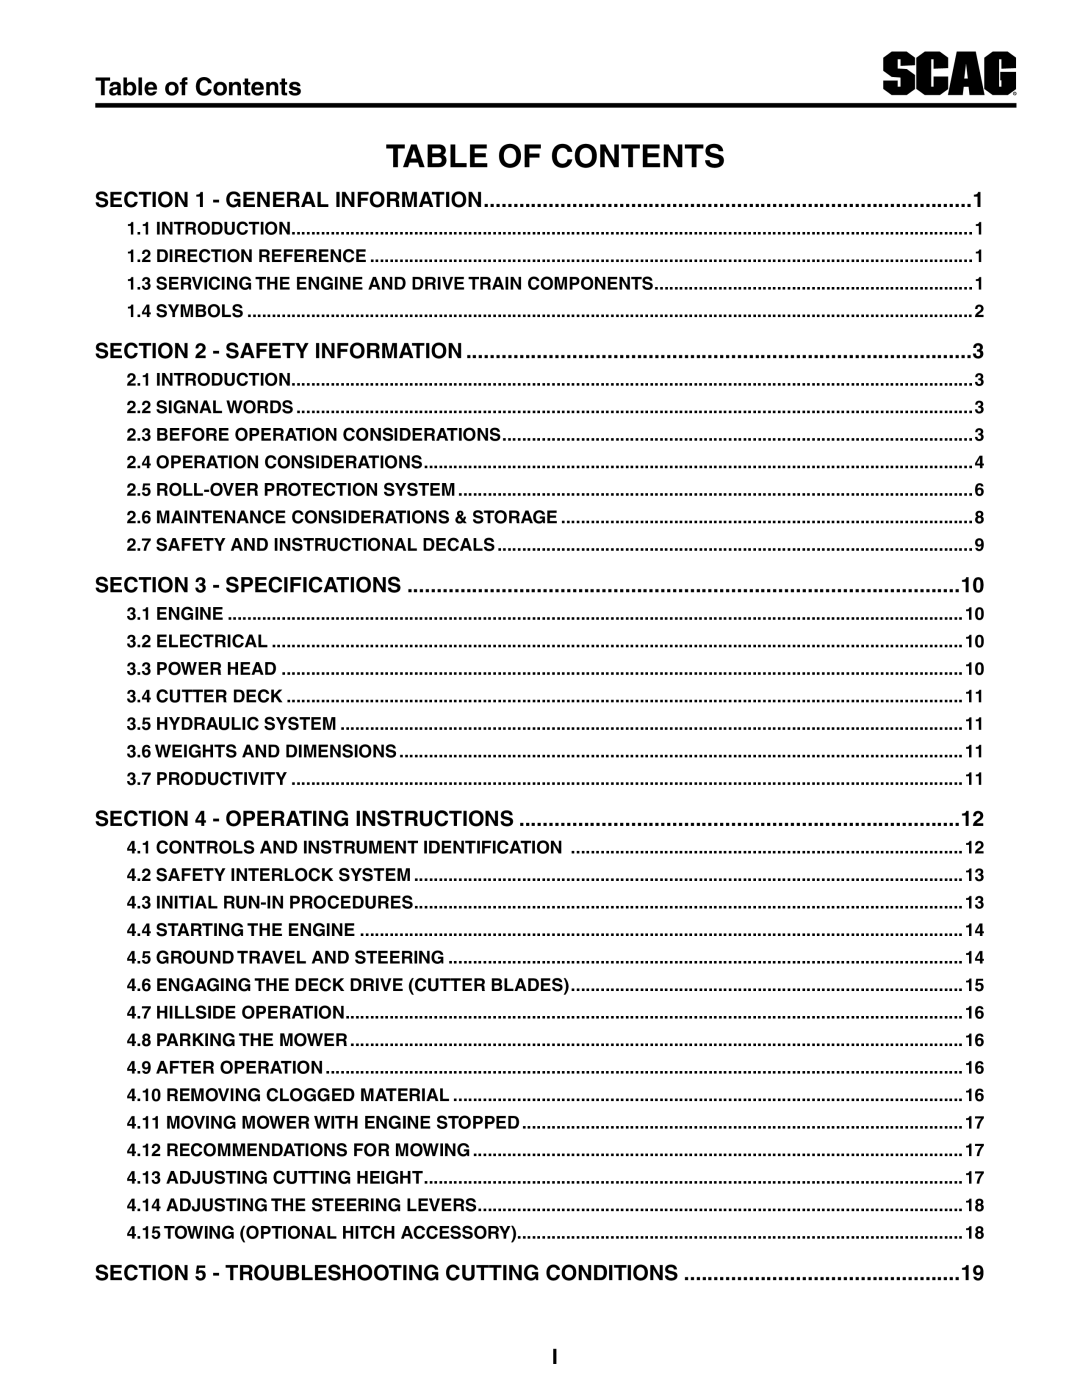 Scag Power Equipment STWC61V-27CV manual Table Of Contents, Table of Contents, General Information, Safety Information 